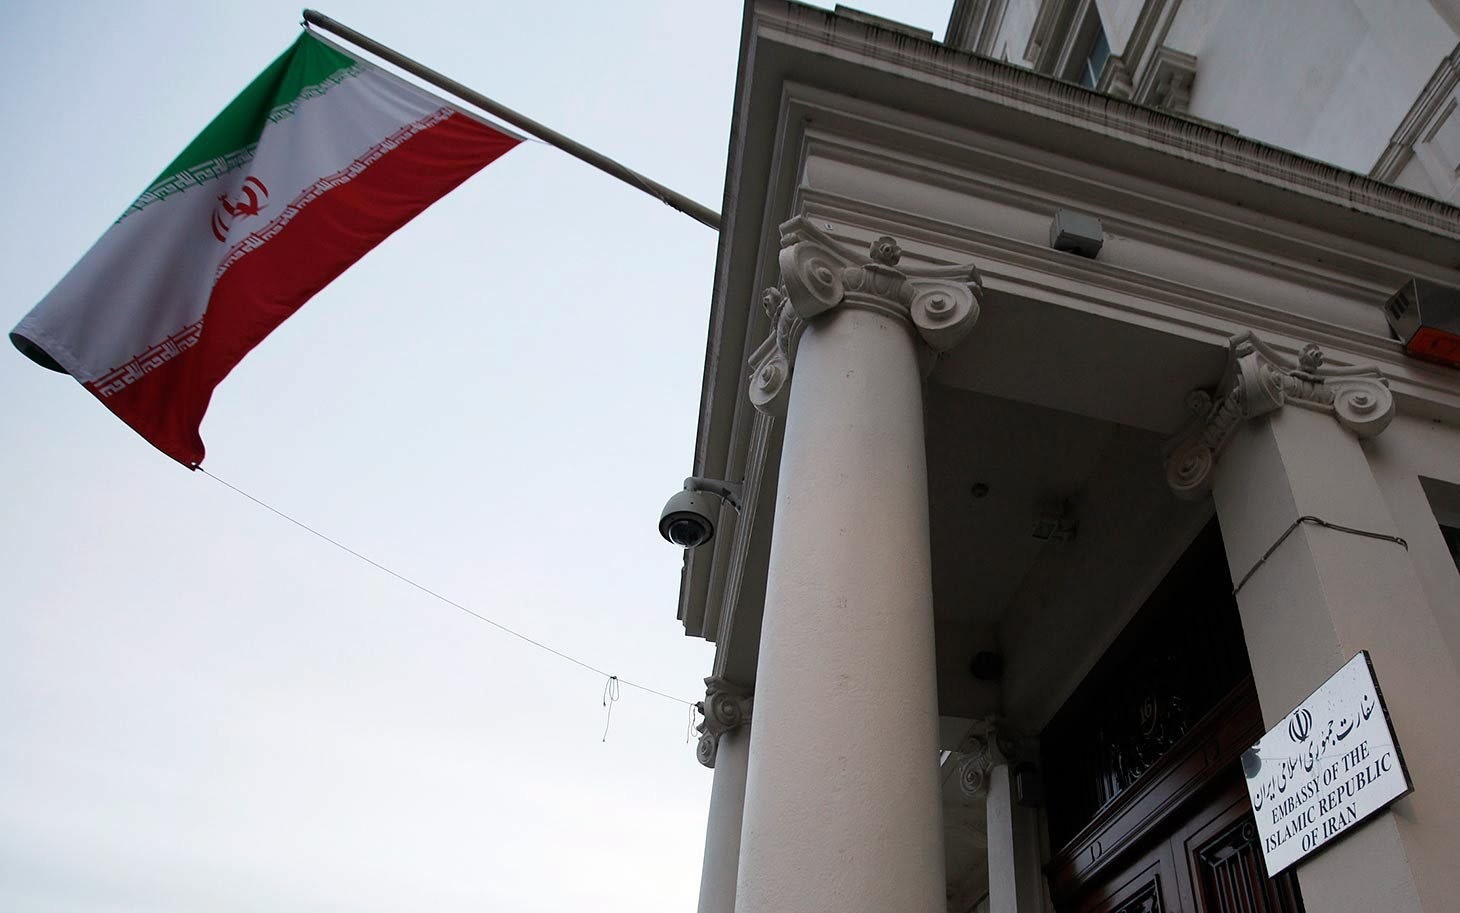  the Iranian flag flies outside the Iranian embassy in London in December 2011. (AP Photo)